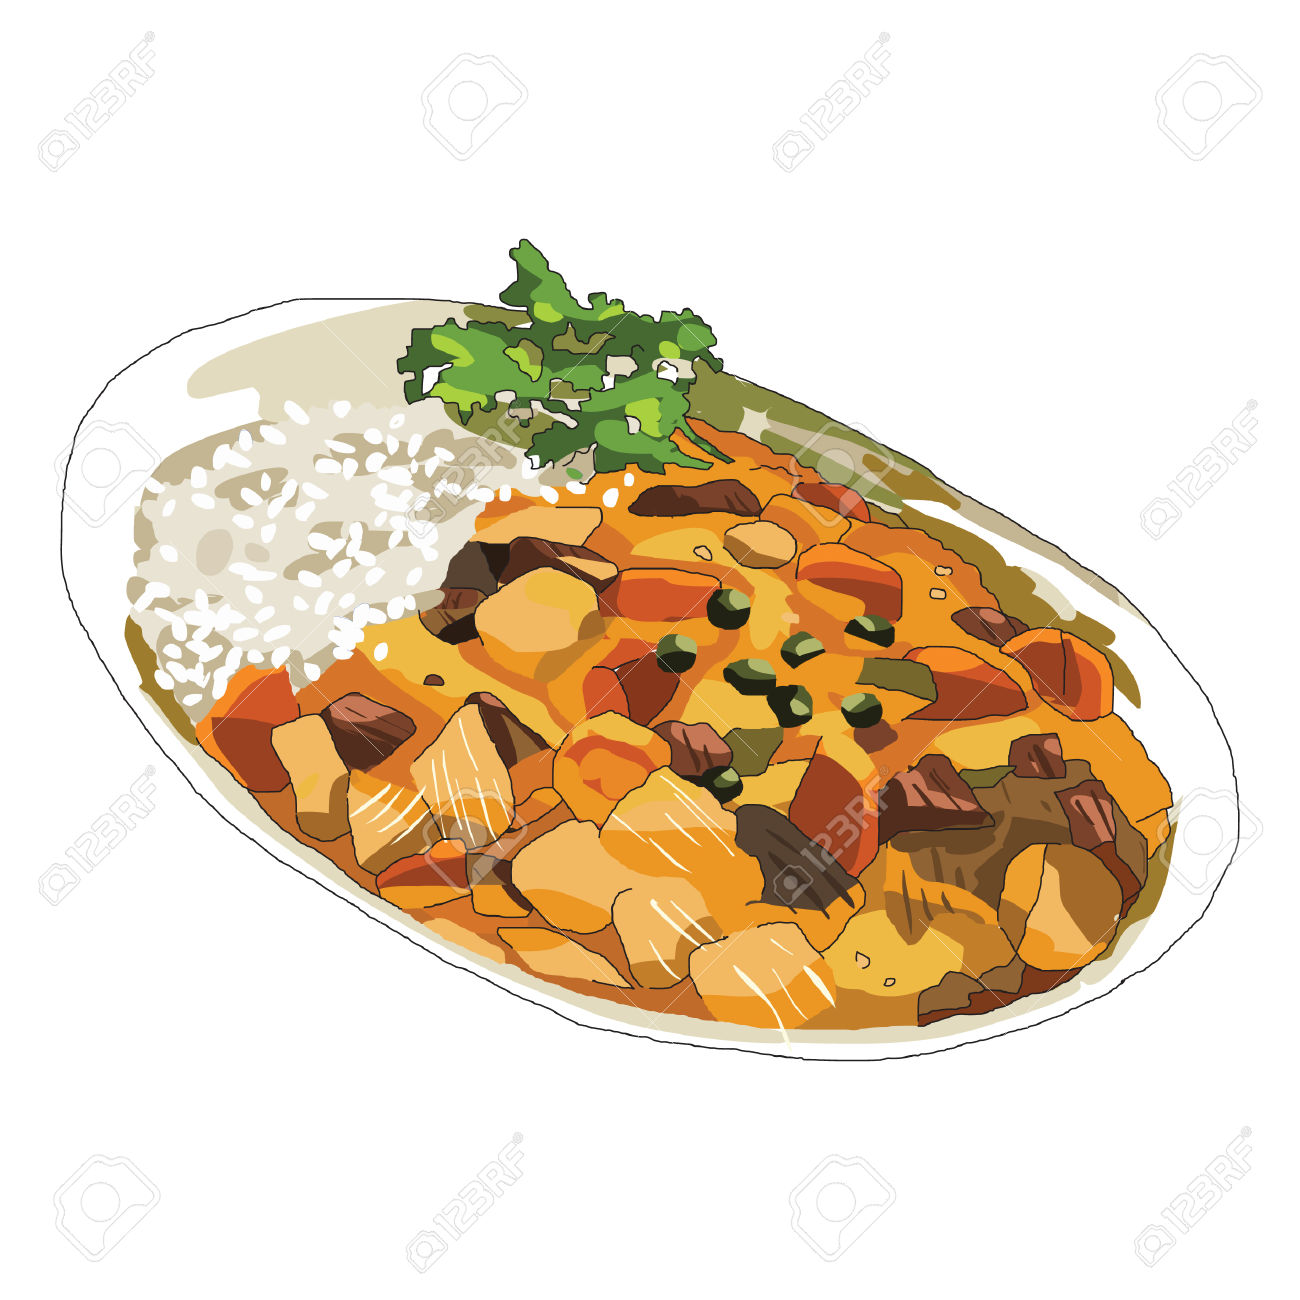 chicken curry clipart - photo #8